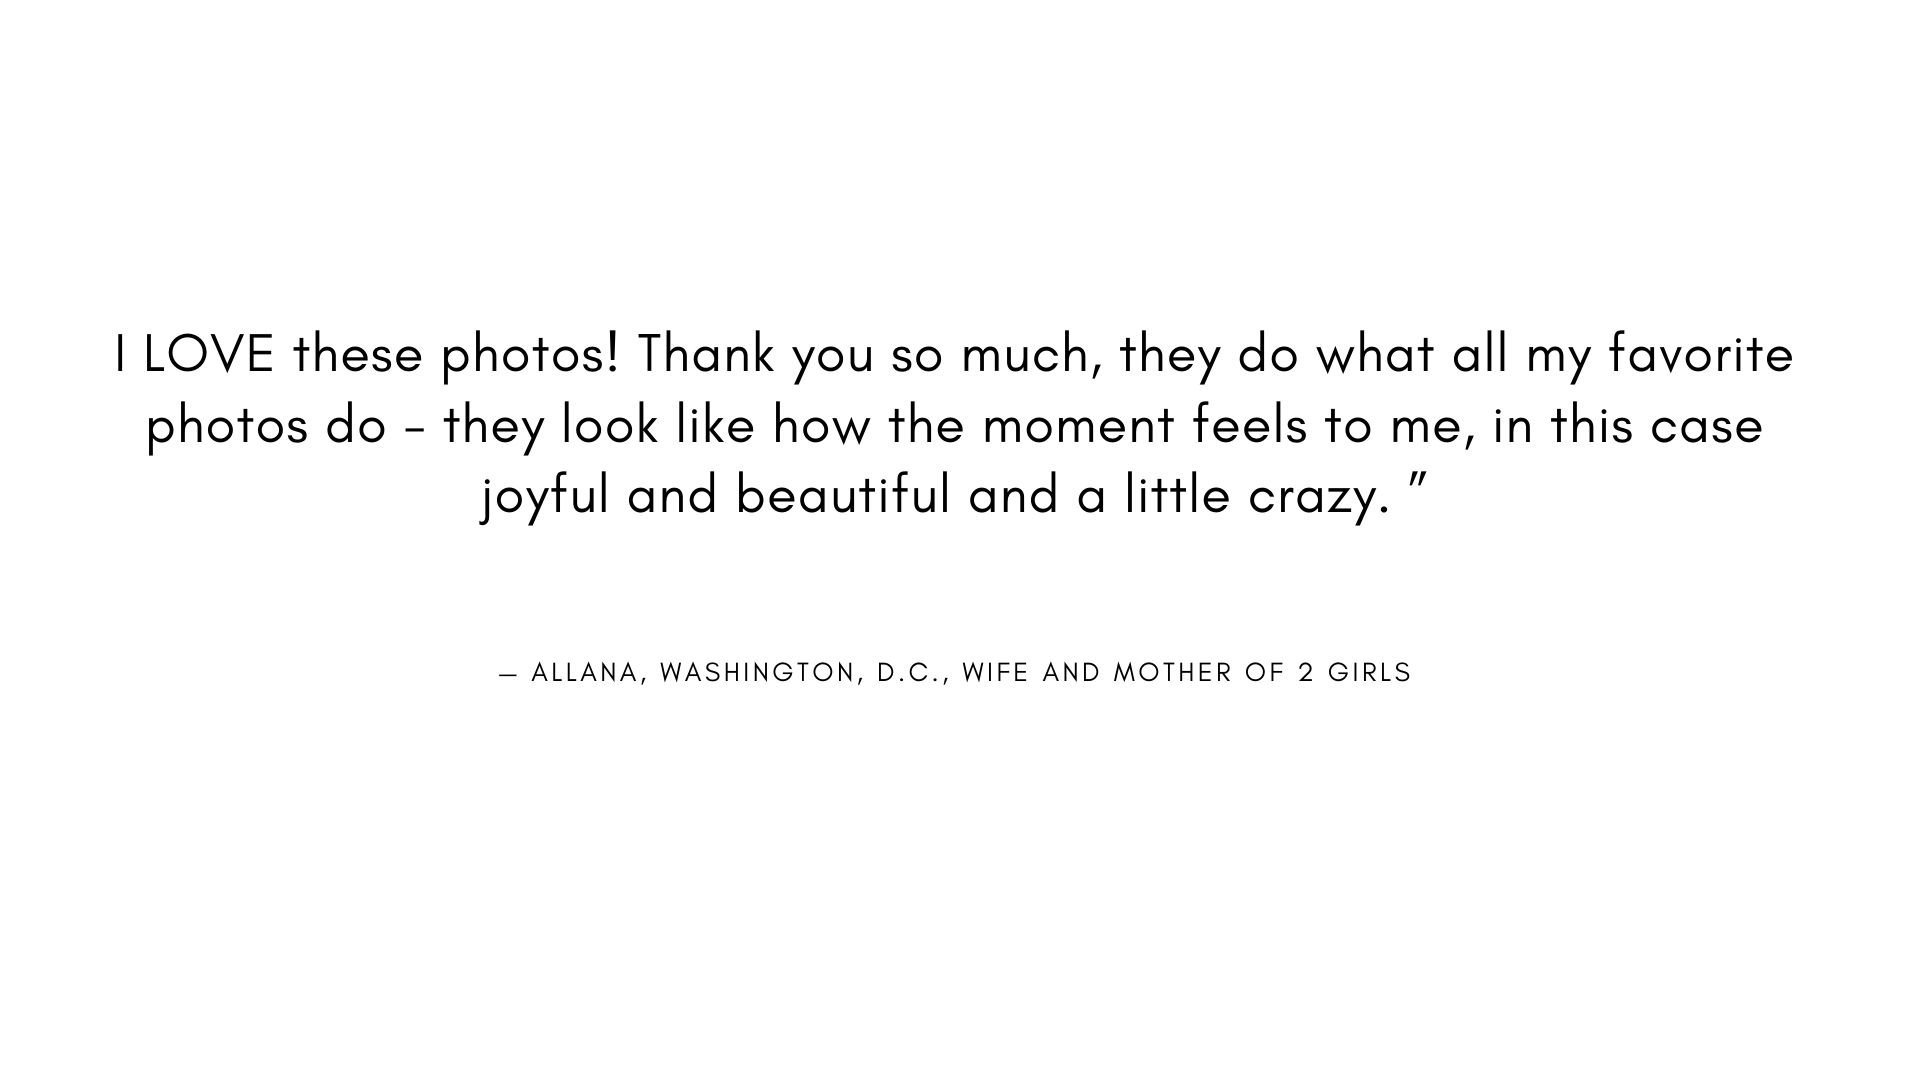  I LOVE these photos! Thank you so much, they do what all my favorite photos do - they look like how the moment feels to me, in this case joyful and beautiful and a little crazy. "  - ALLANA, WASHINGTON, D.C., WIFE AND MOTHER OF 2 GIRLS 